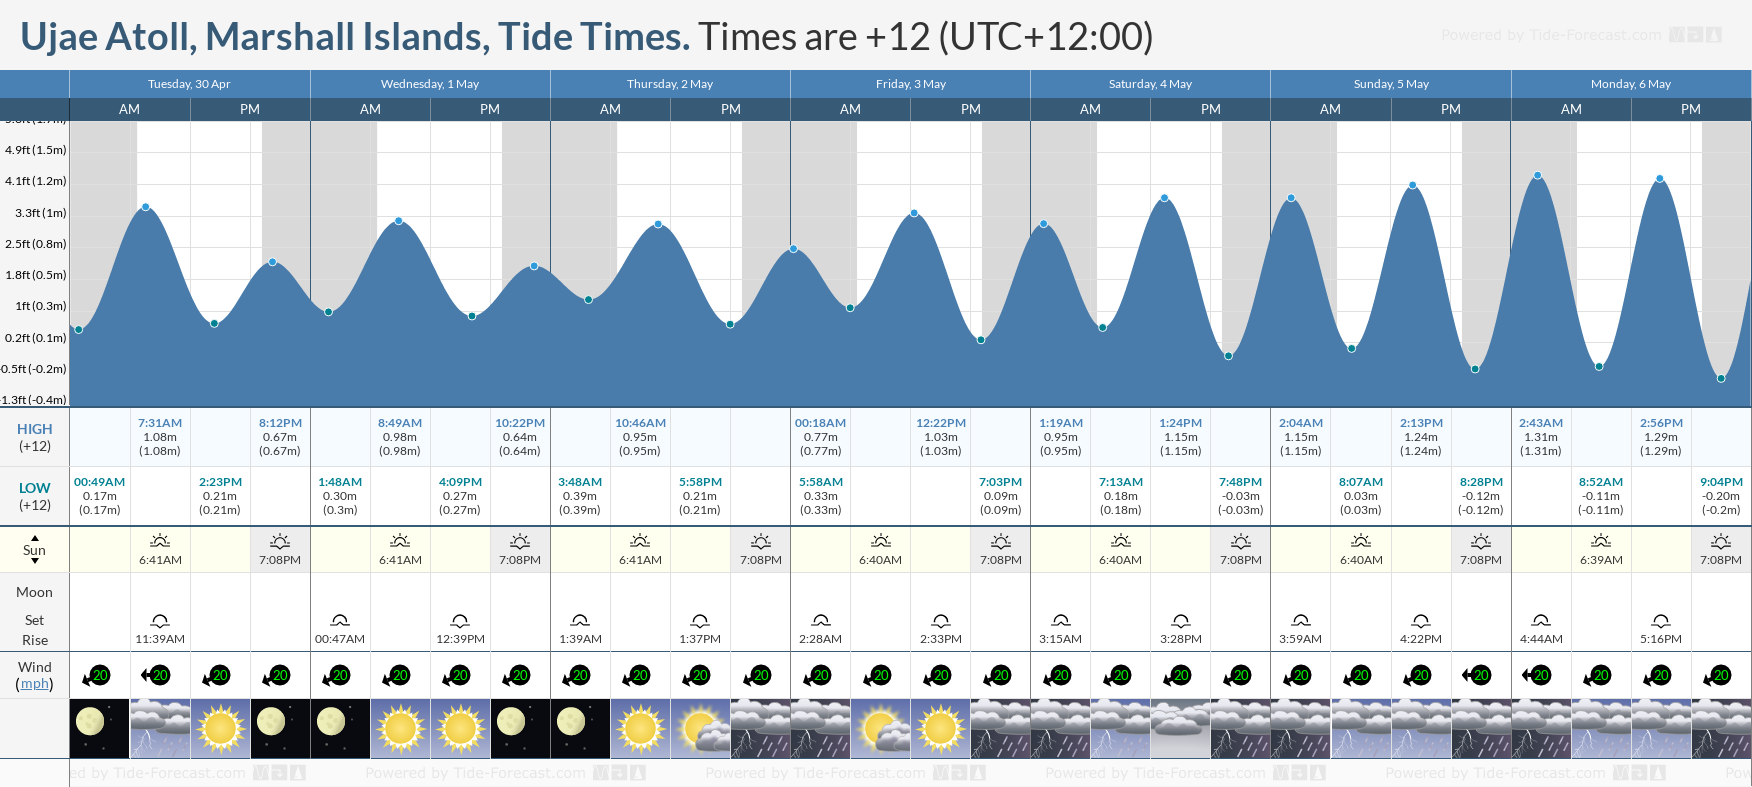 Ujae Atoll, Marshall Islands Tide Chart including high and low tide tide times for the next 7 days